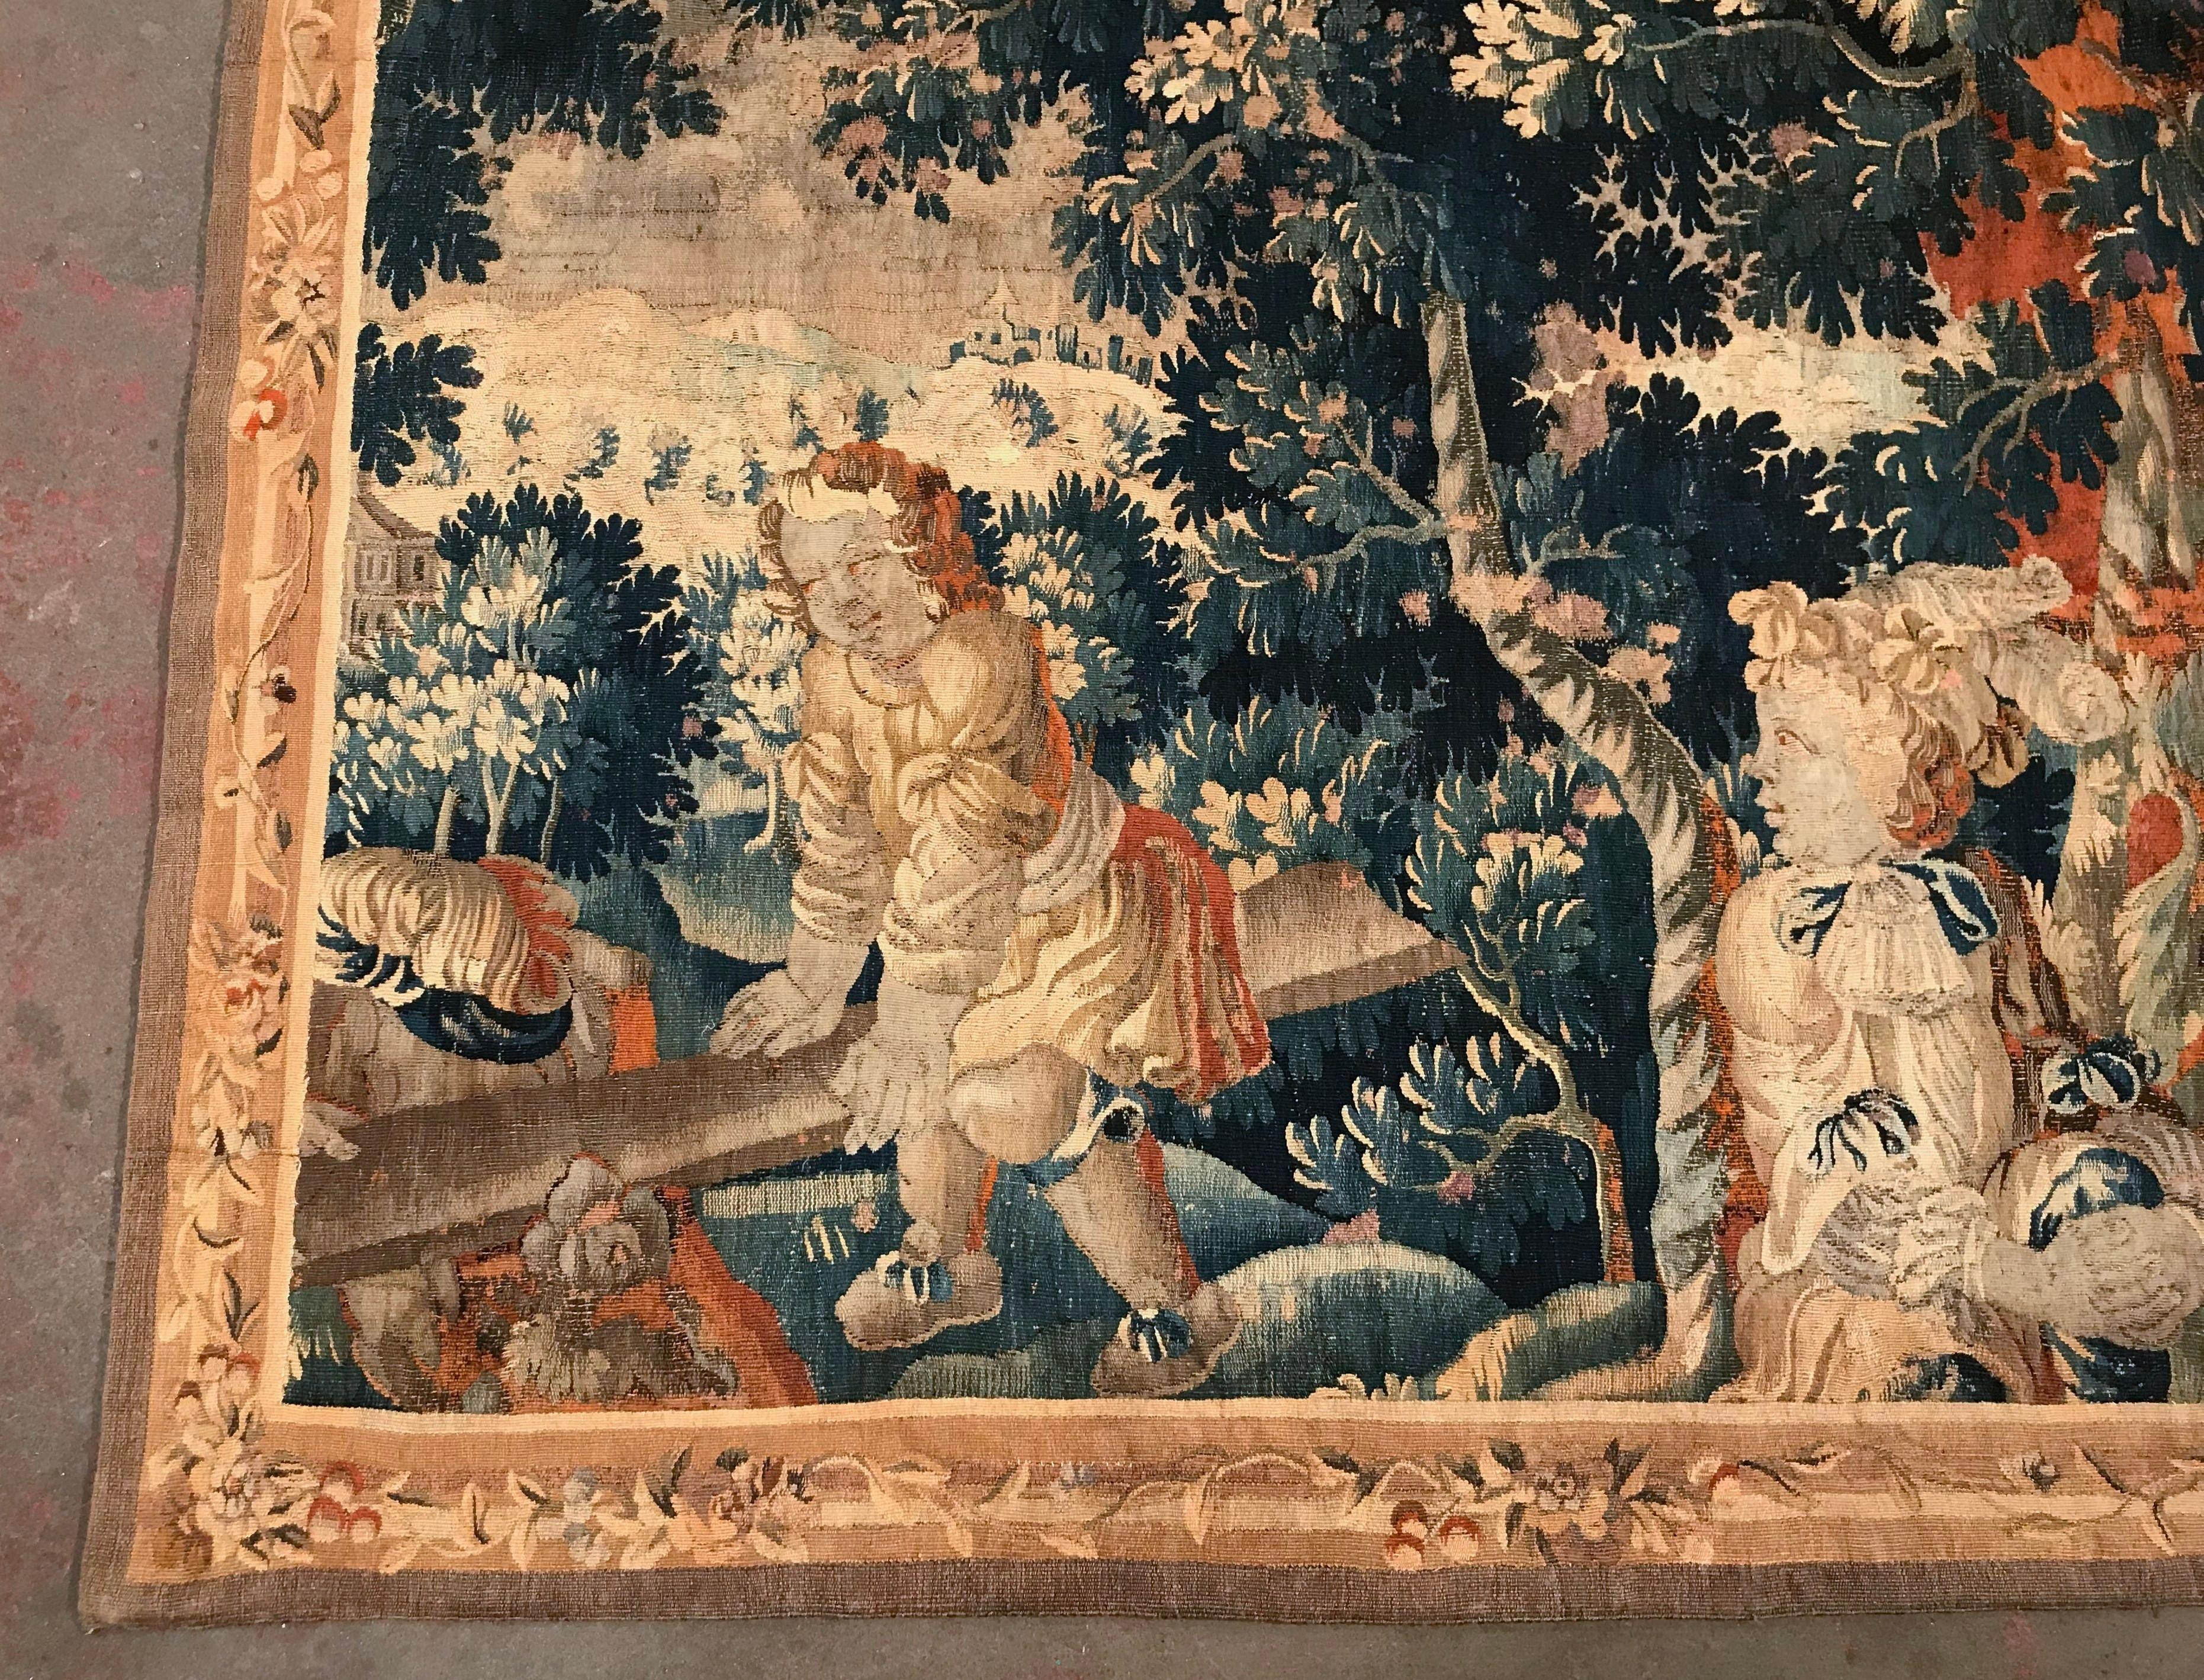 Handwoven in Aubusson, France, circa 1780, and set in a beige border decorated with floral motifs, the colorful wall piece features two young cheerful cherubs at play, one sited on a swing board, the other looking on. The tapestry is further